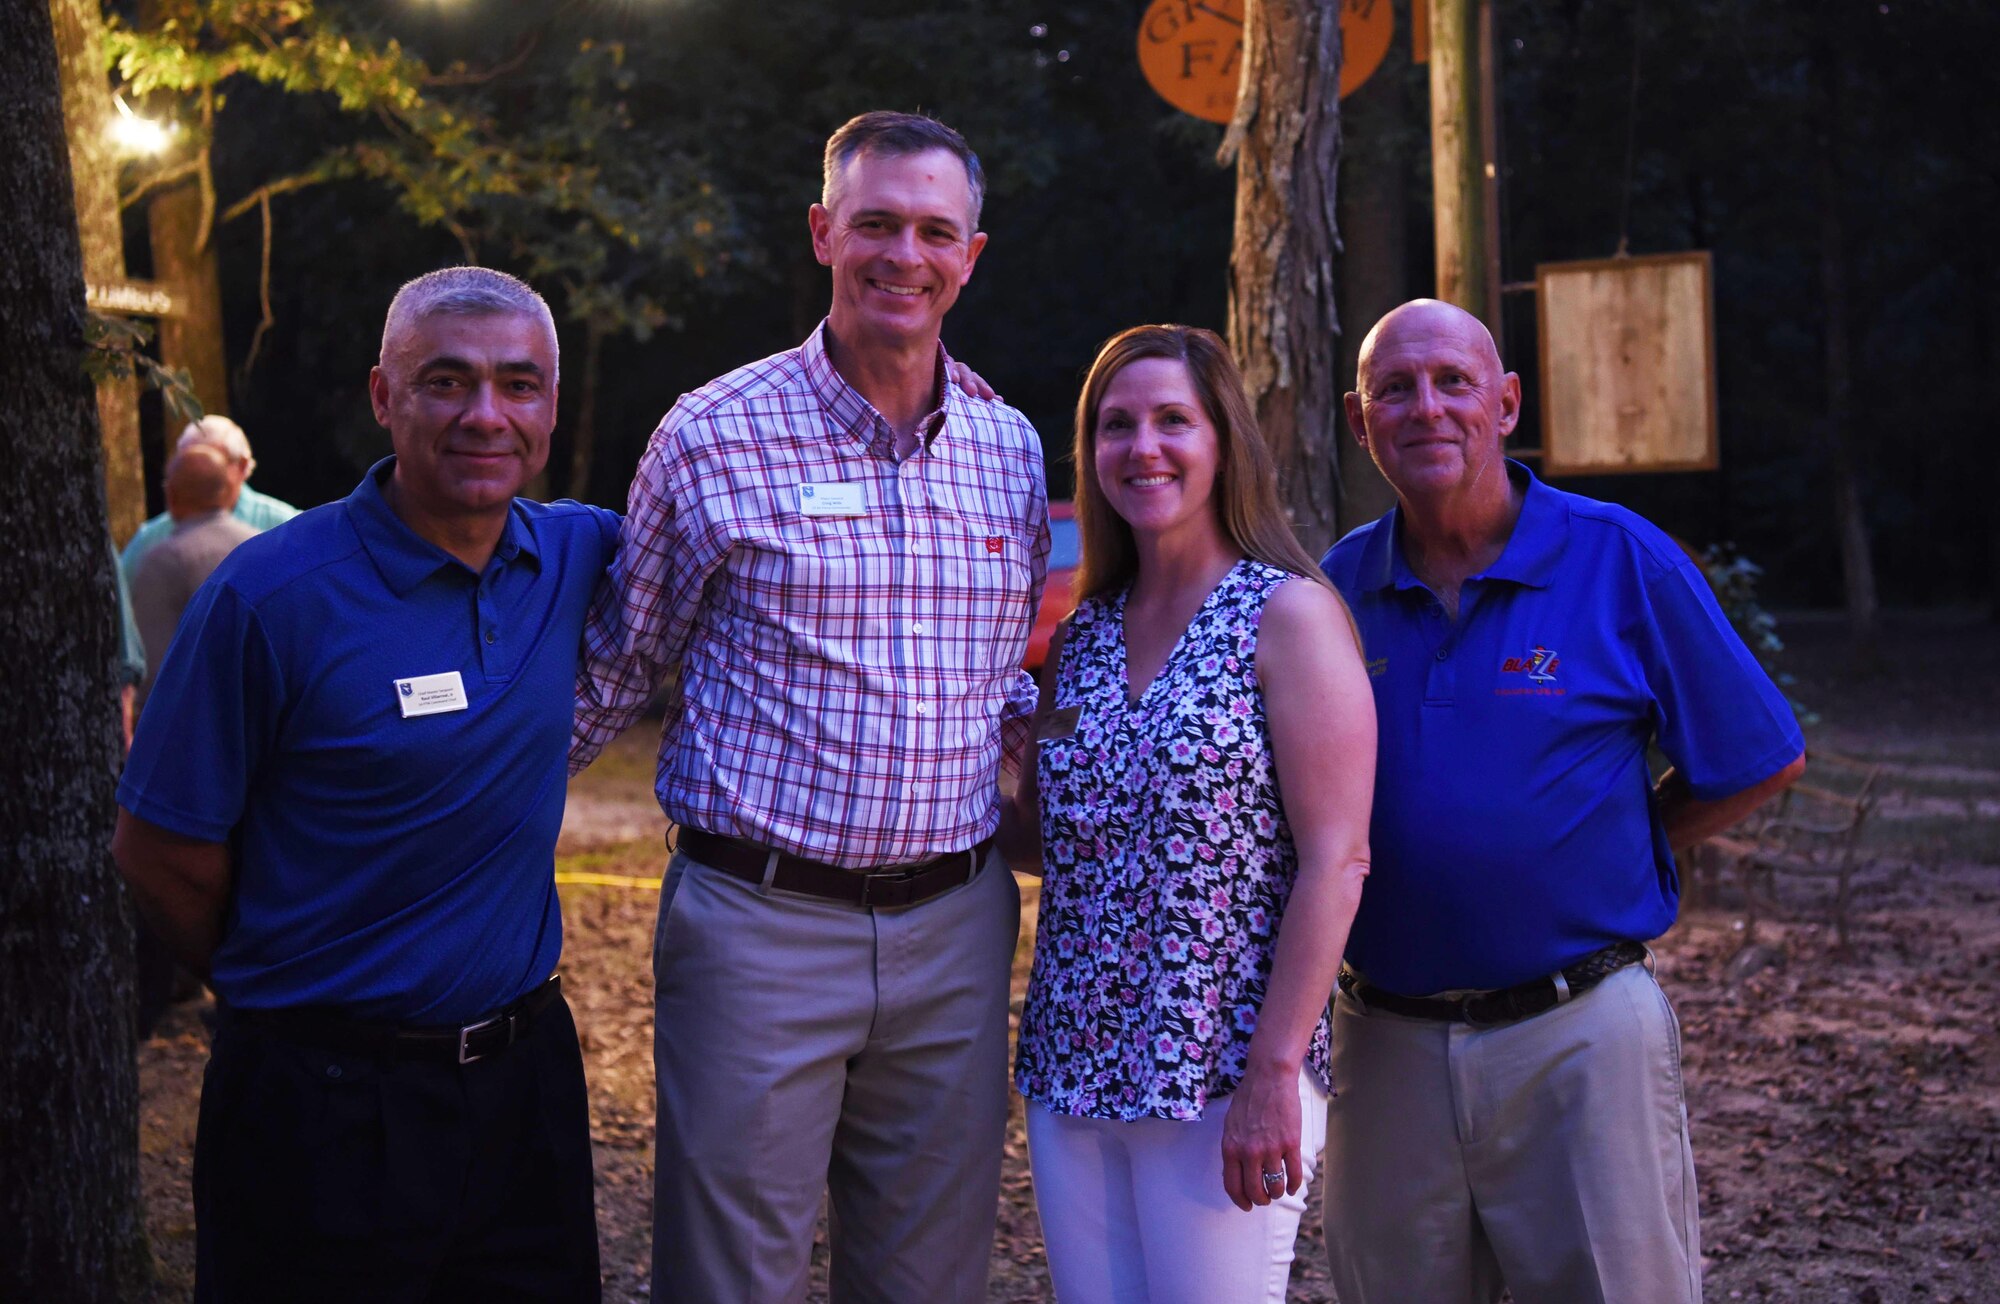 (From left to right) Chief Master Sgt. Raul Villarreal, 14th Flying Training Wing command chief, Maj. Gen. Wills, 19th Air Force commander, Col. Samantha Weeks, 14th Flying Training Wing commander, and Chuck Bigelow, Base Community Council president, attend a base/community event Oct. 1, 2019, in Columbus, Miss. During Wills’ visit he attended an event at Grahams Camp to see the engagement between leaders of Columbus Air Force Base and the members of the community. (U.S. Air Force photo by Airman 1st Class Jake Jacobsen)